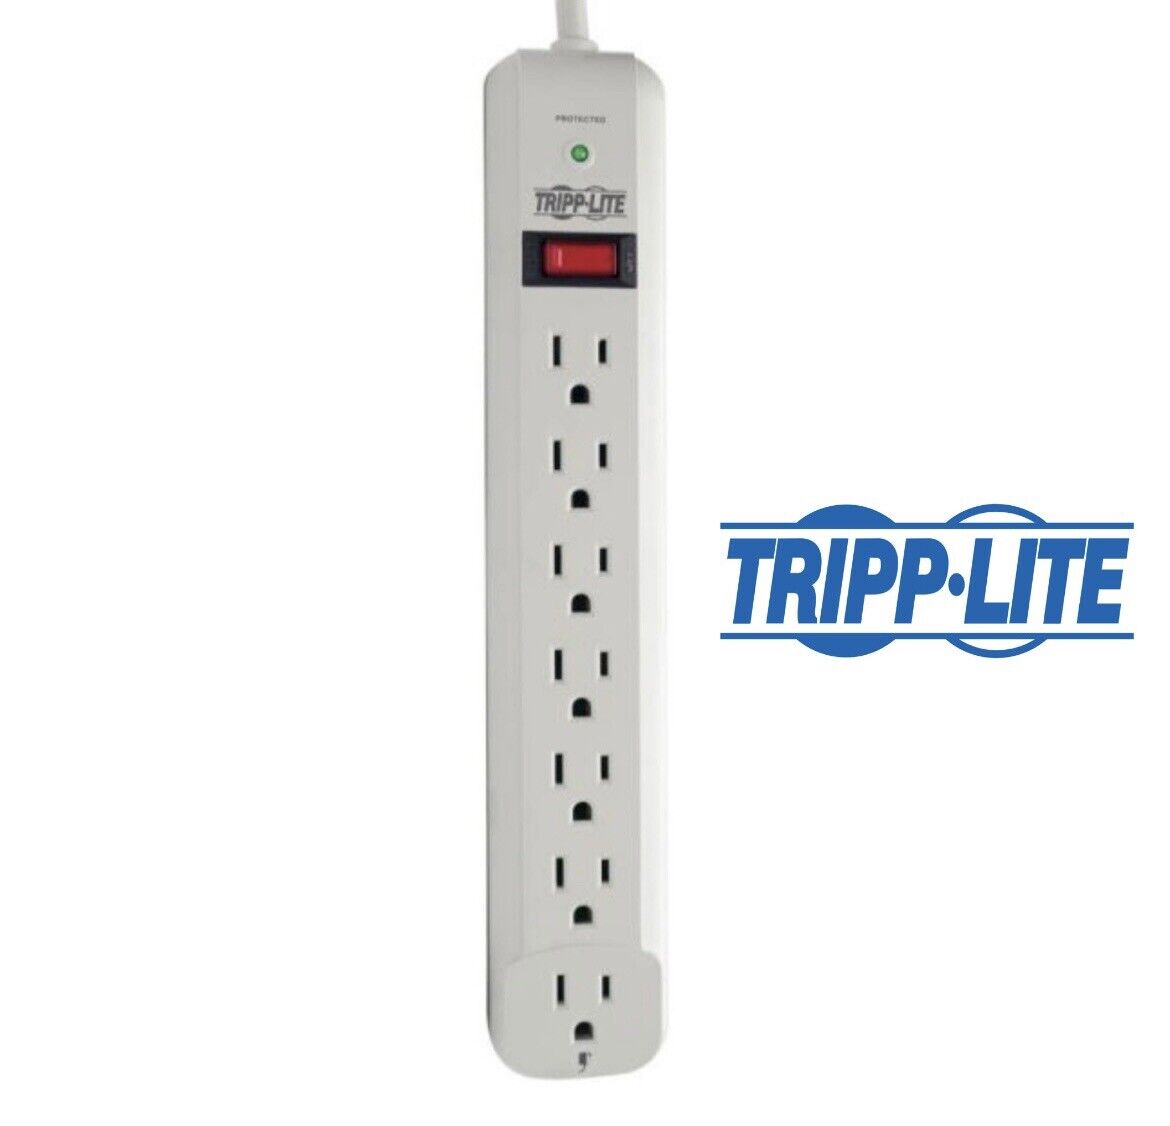 Tripp-Lite Surge Protector 6ft White Safe office Gaming PC Safe Power Strip